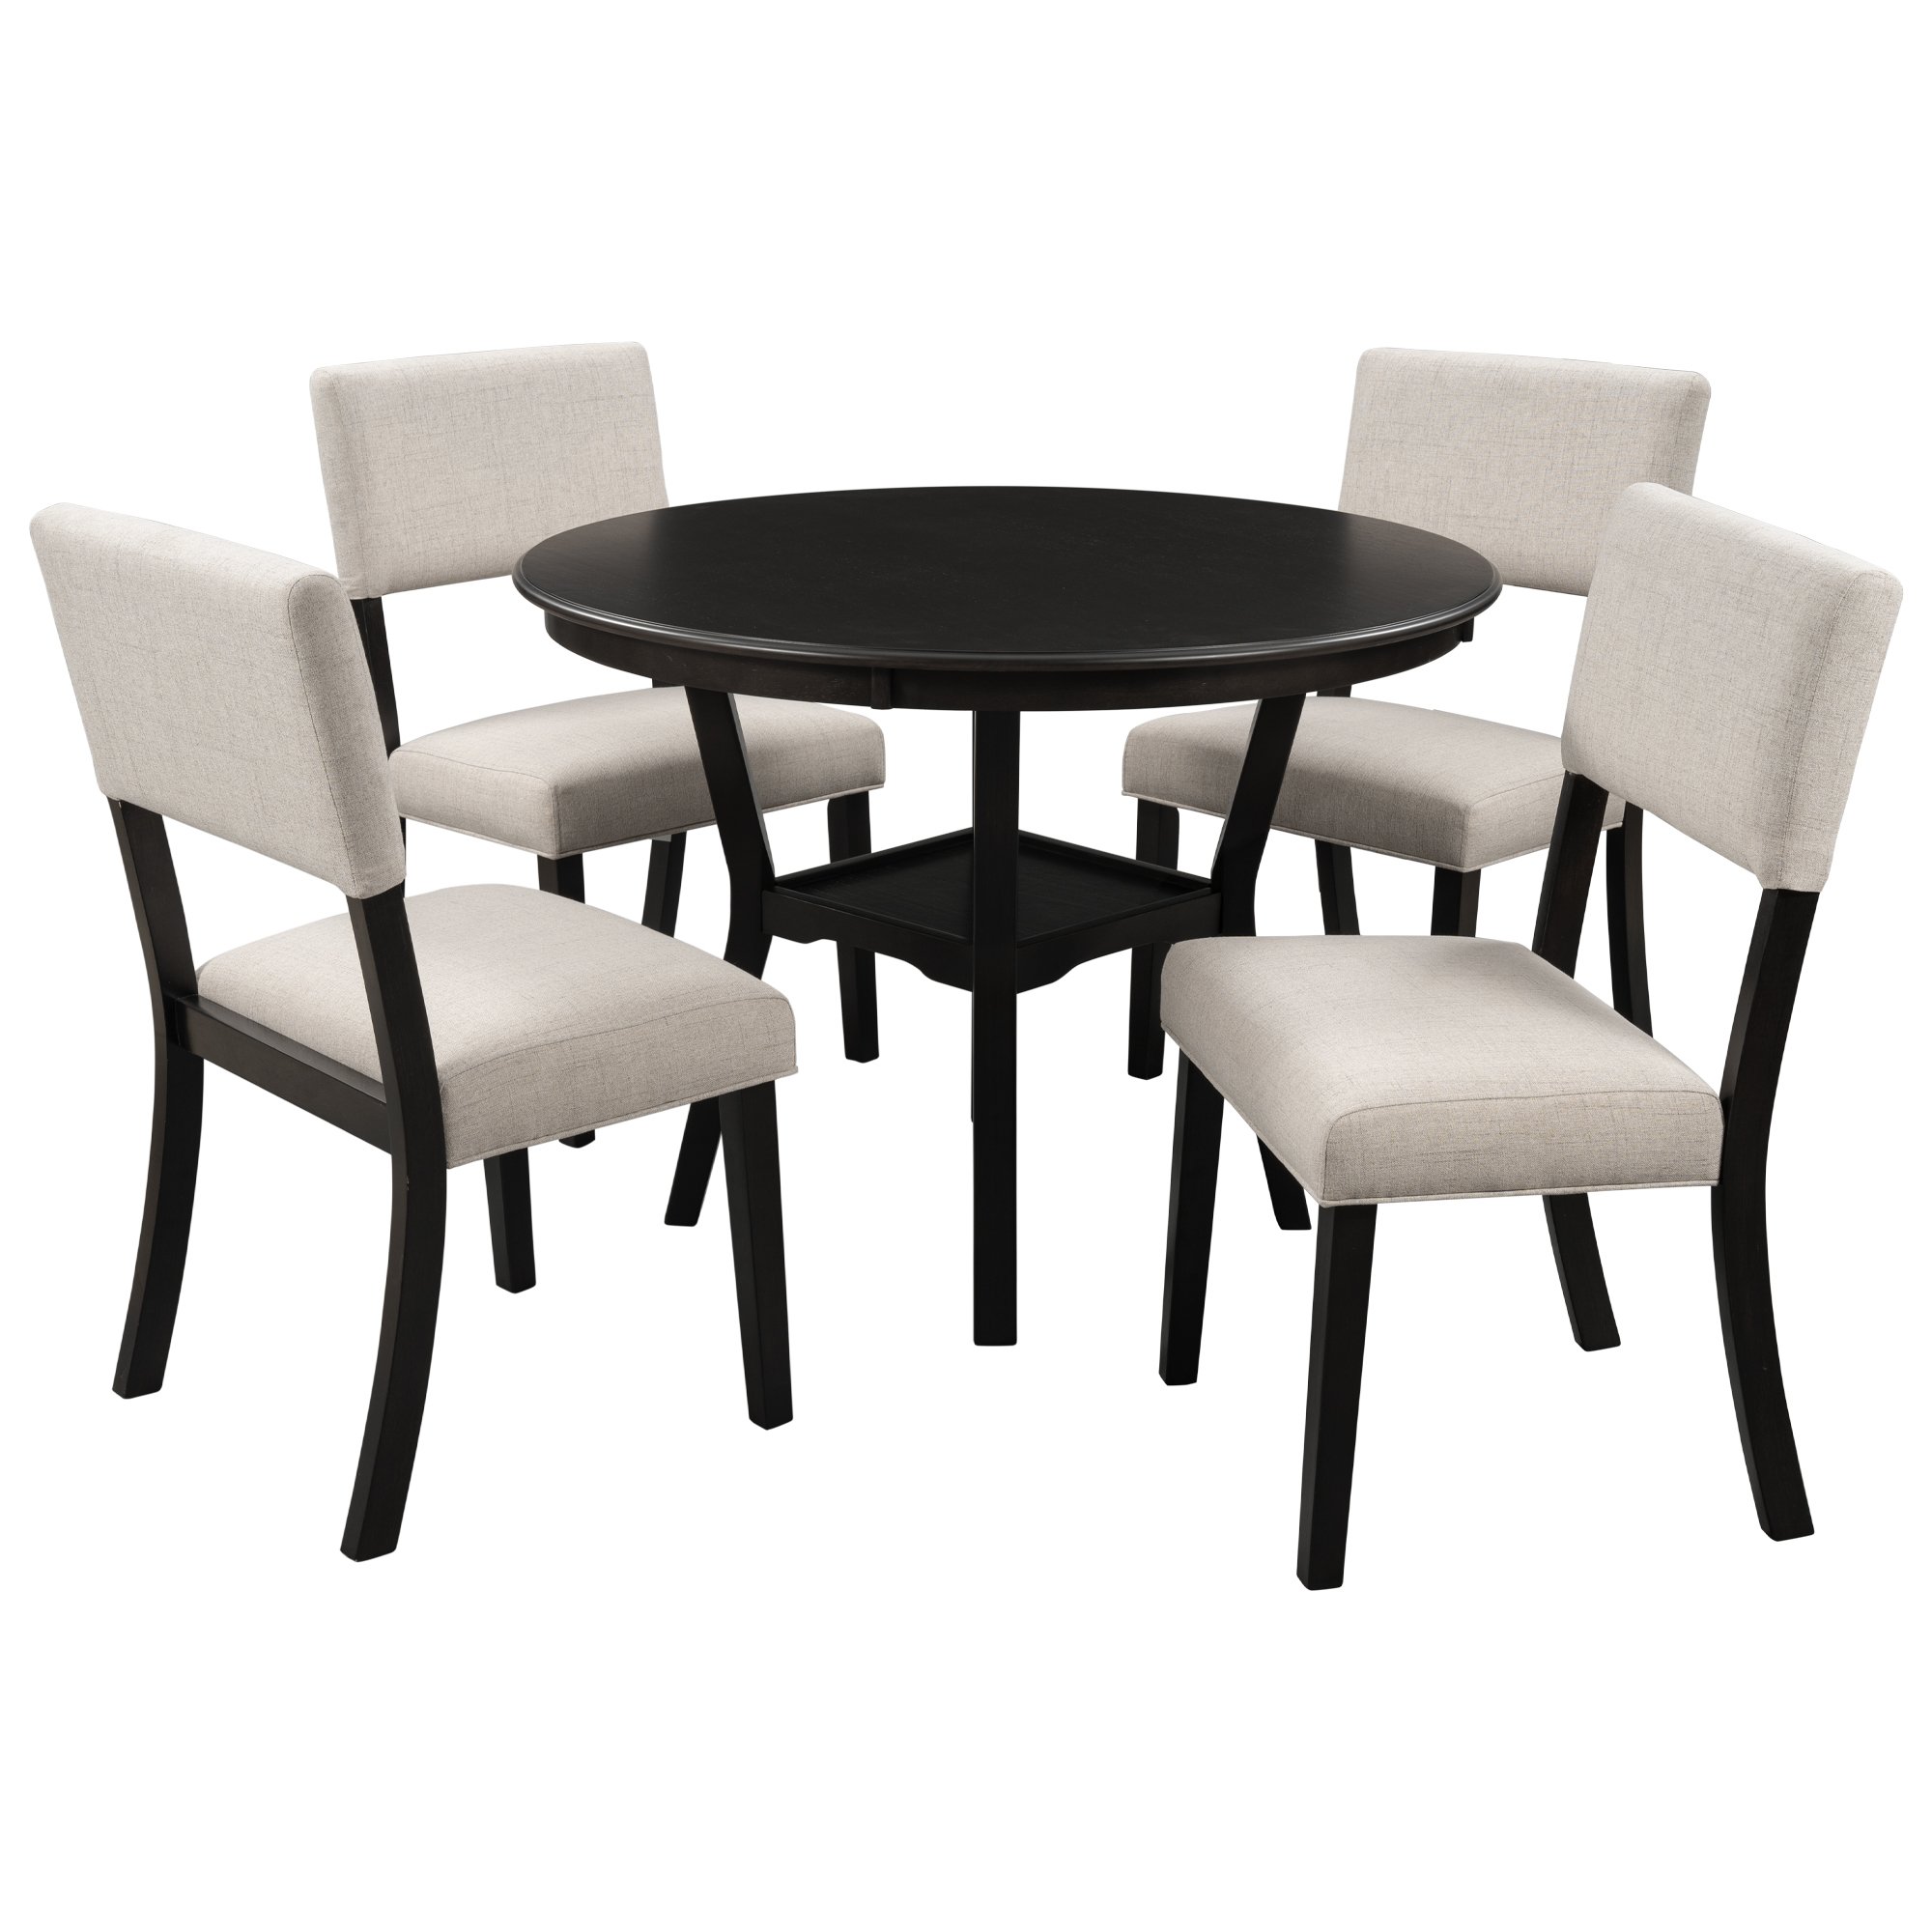 5-Piece Kitchen Dining Table Set Round Table with Bottom Shelf, 4 Upholstered Chairs for Dining Room（Espresso）-CASAINC